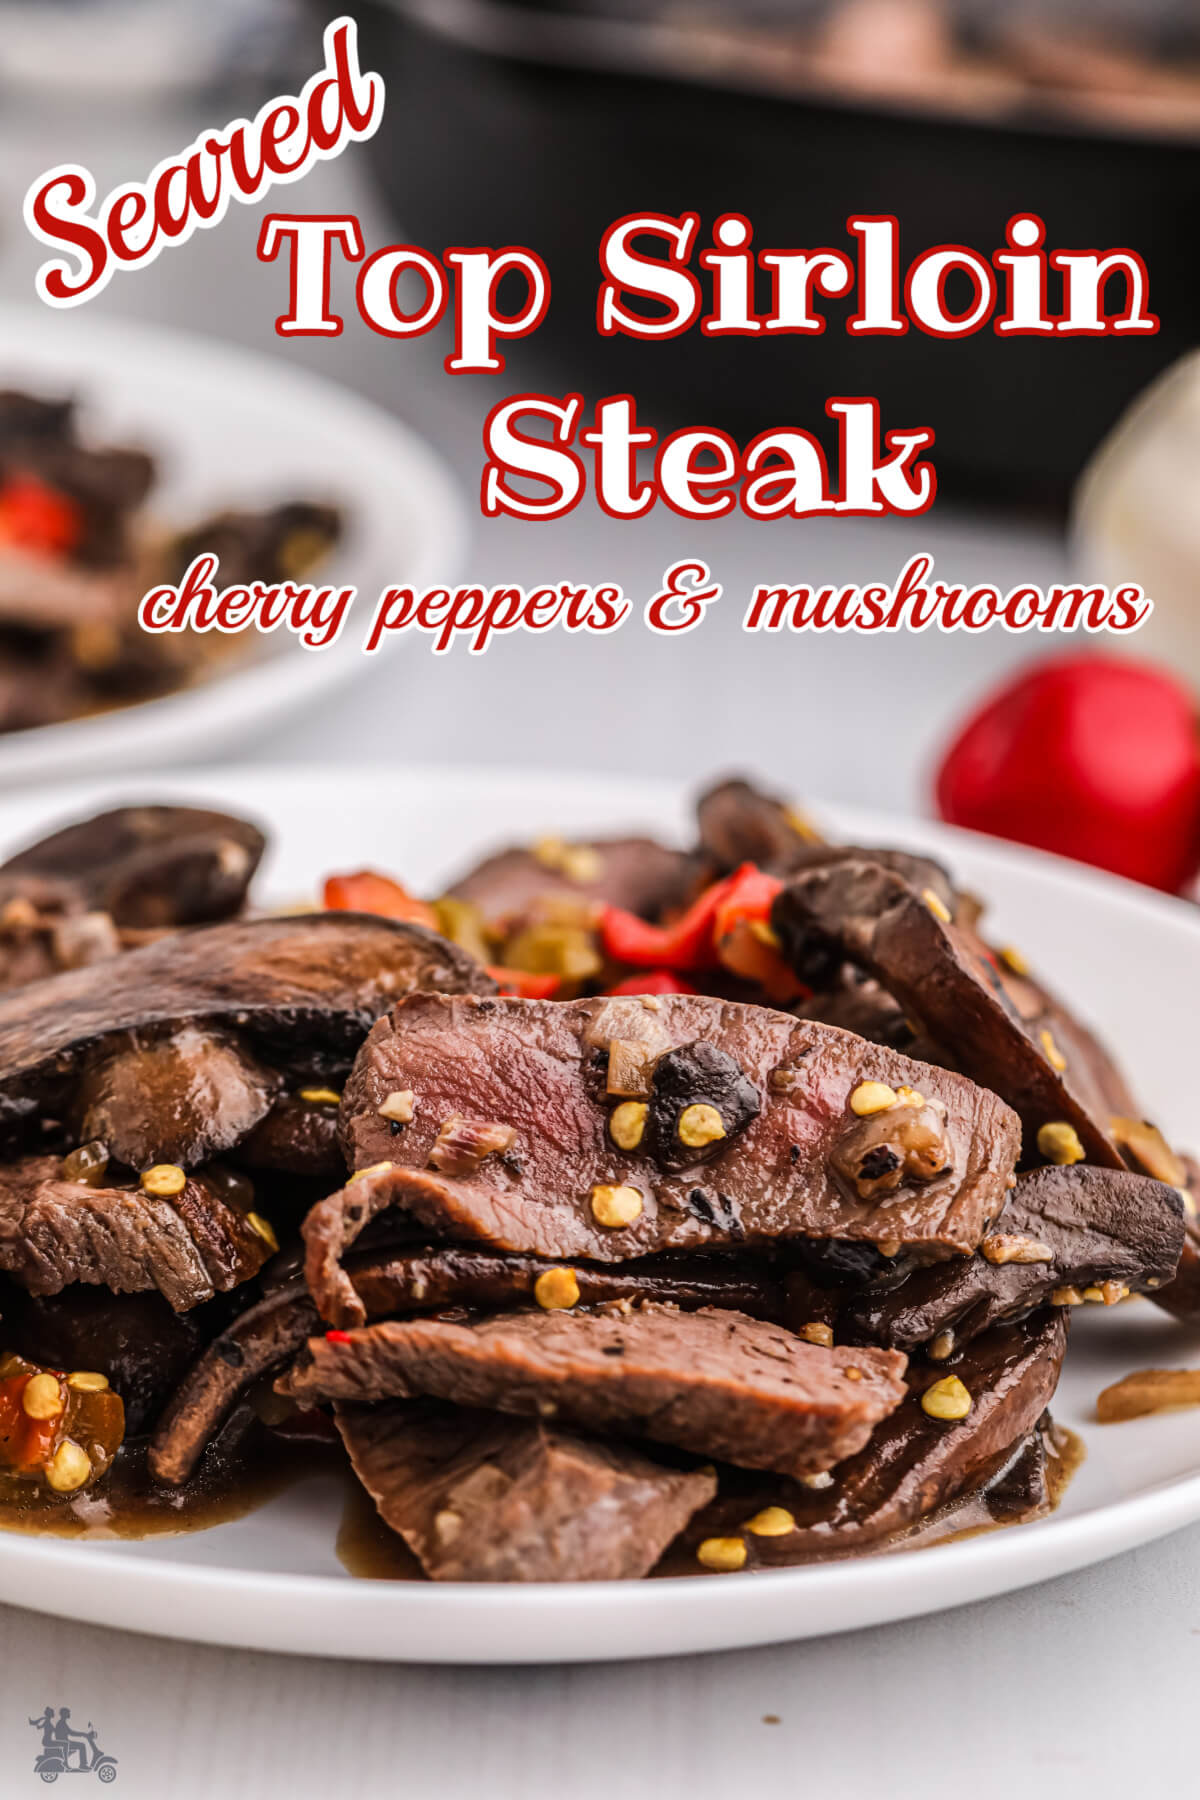 Serving of Sliced steak with peppers and mushrooms.